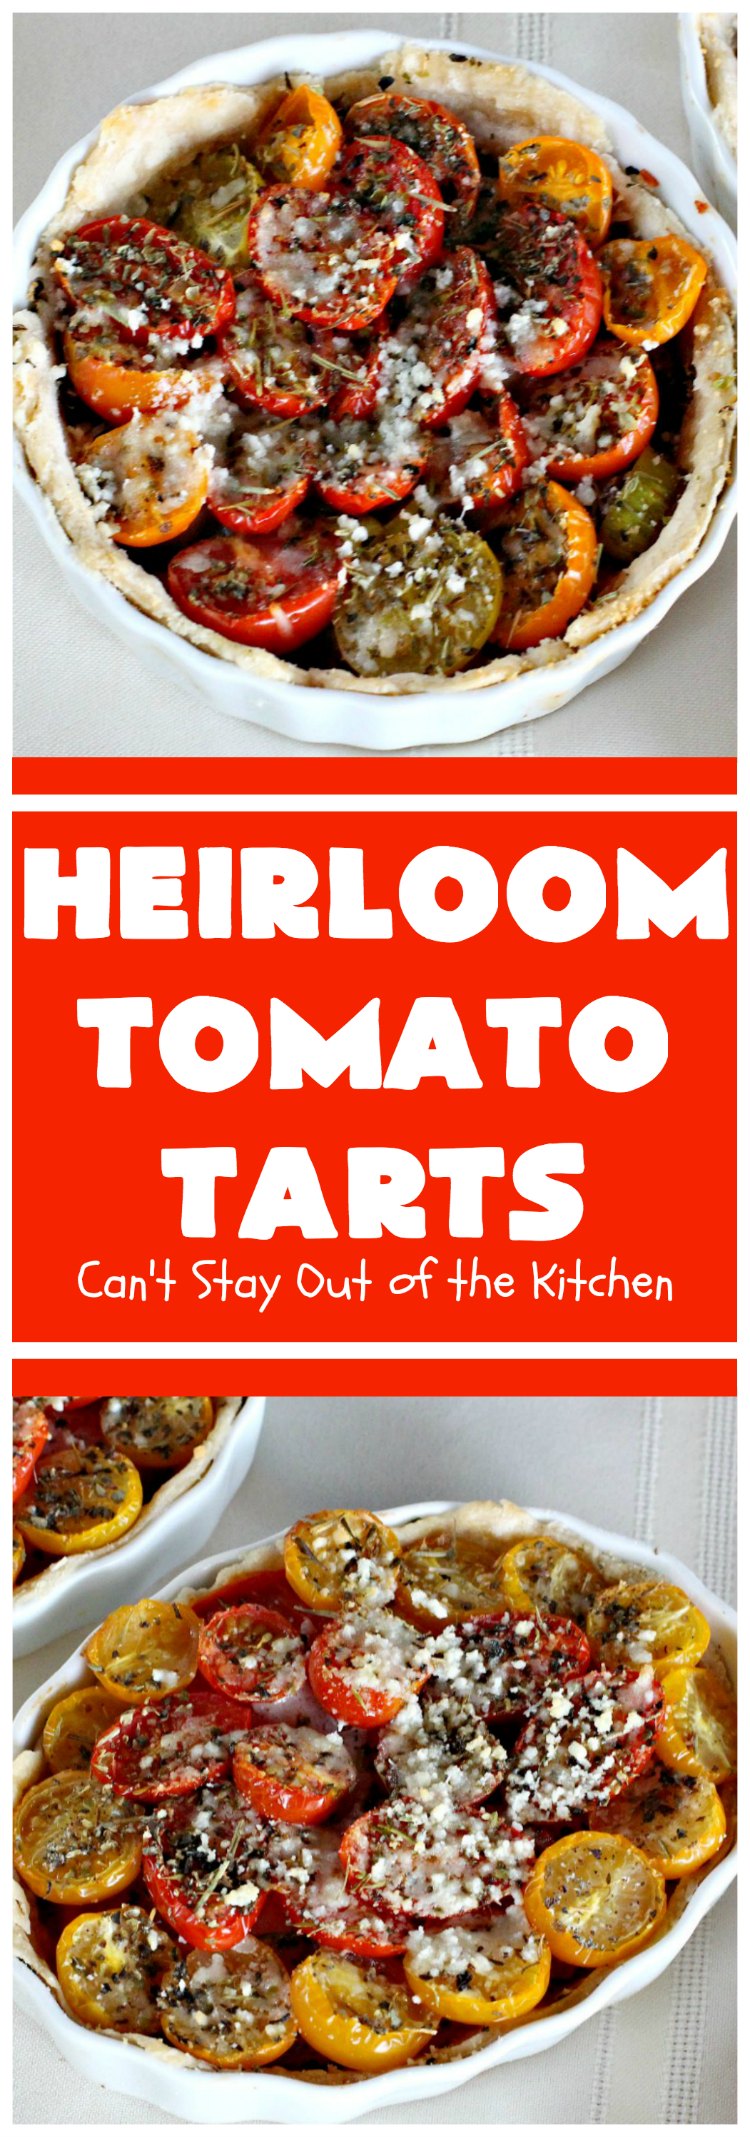 Heirloom Tomato Tarts | Can't Stay Out of the Kitchen